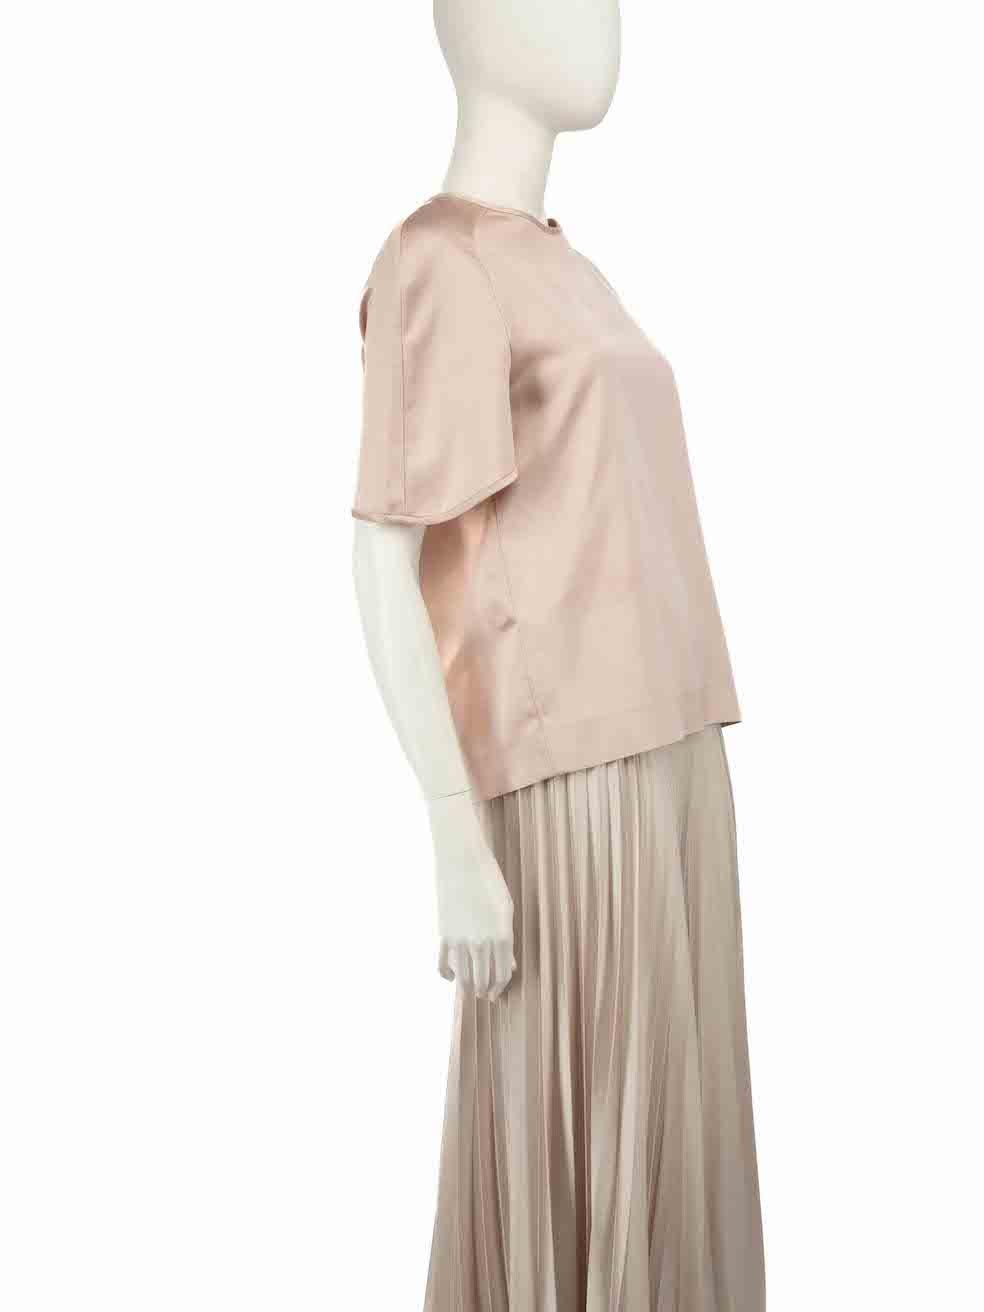 CONDITION is Very good. Minimal wear to top is evident. Minimal pull thread to the front left hemline and front neckline. Slight discolouration to rear left sleeve and front on this used Chloé designer resale item.
 
 
 
 Details
 
 
 Dusty pink
 
